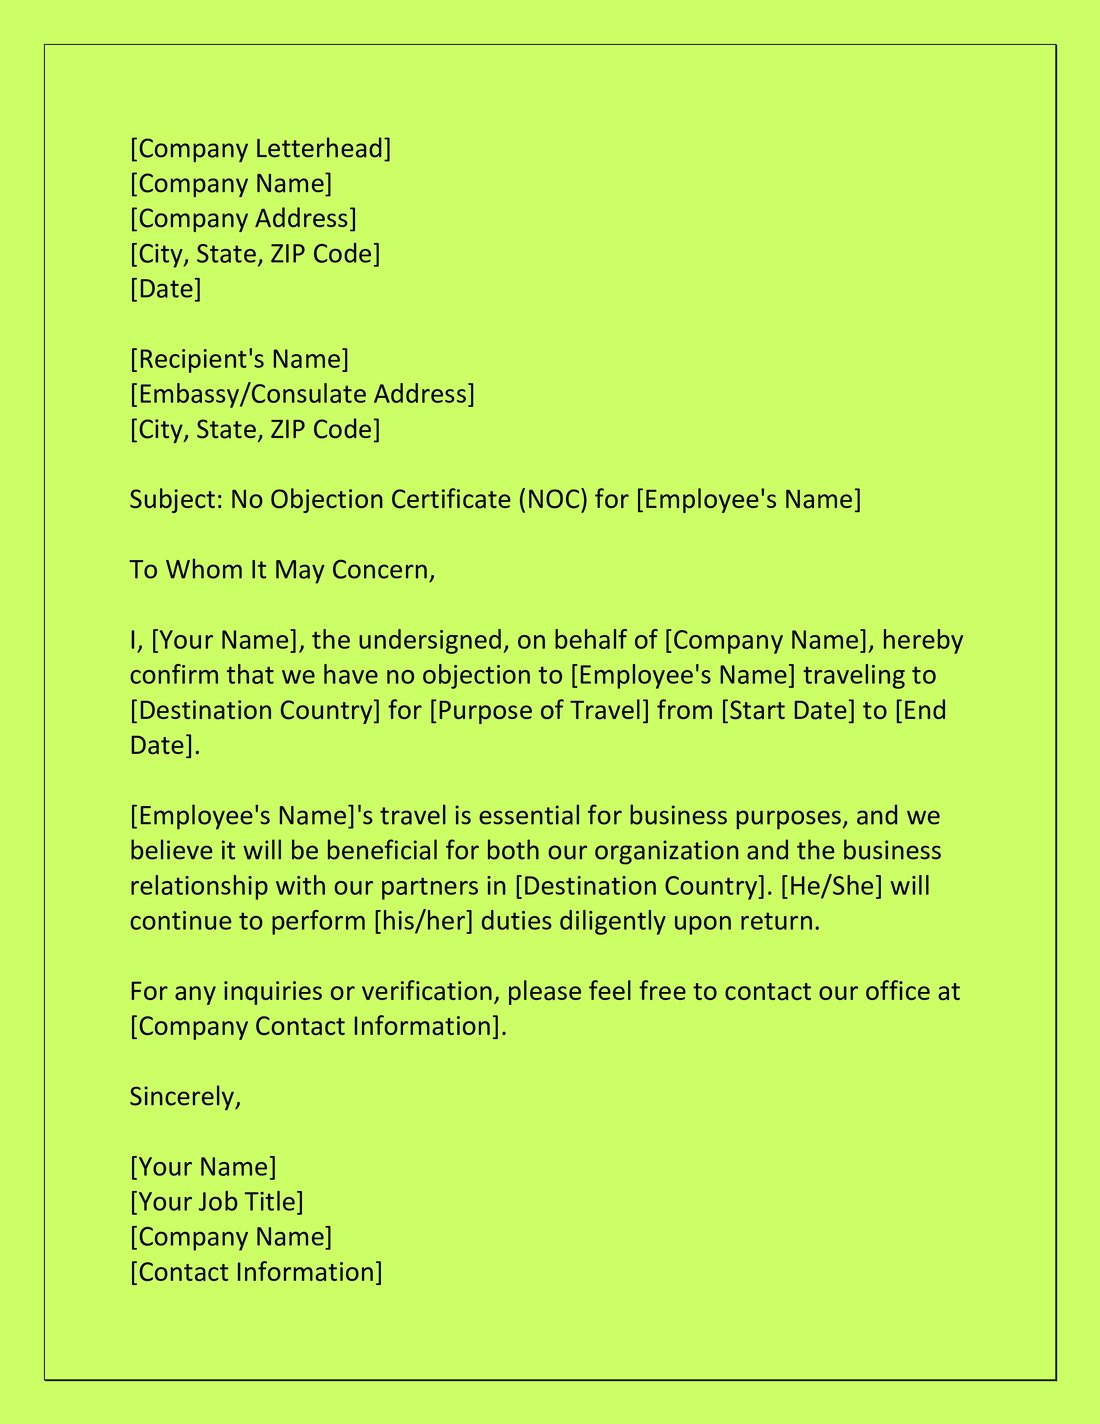 Company NOC Letter for Business Travel